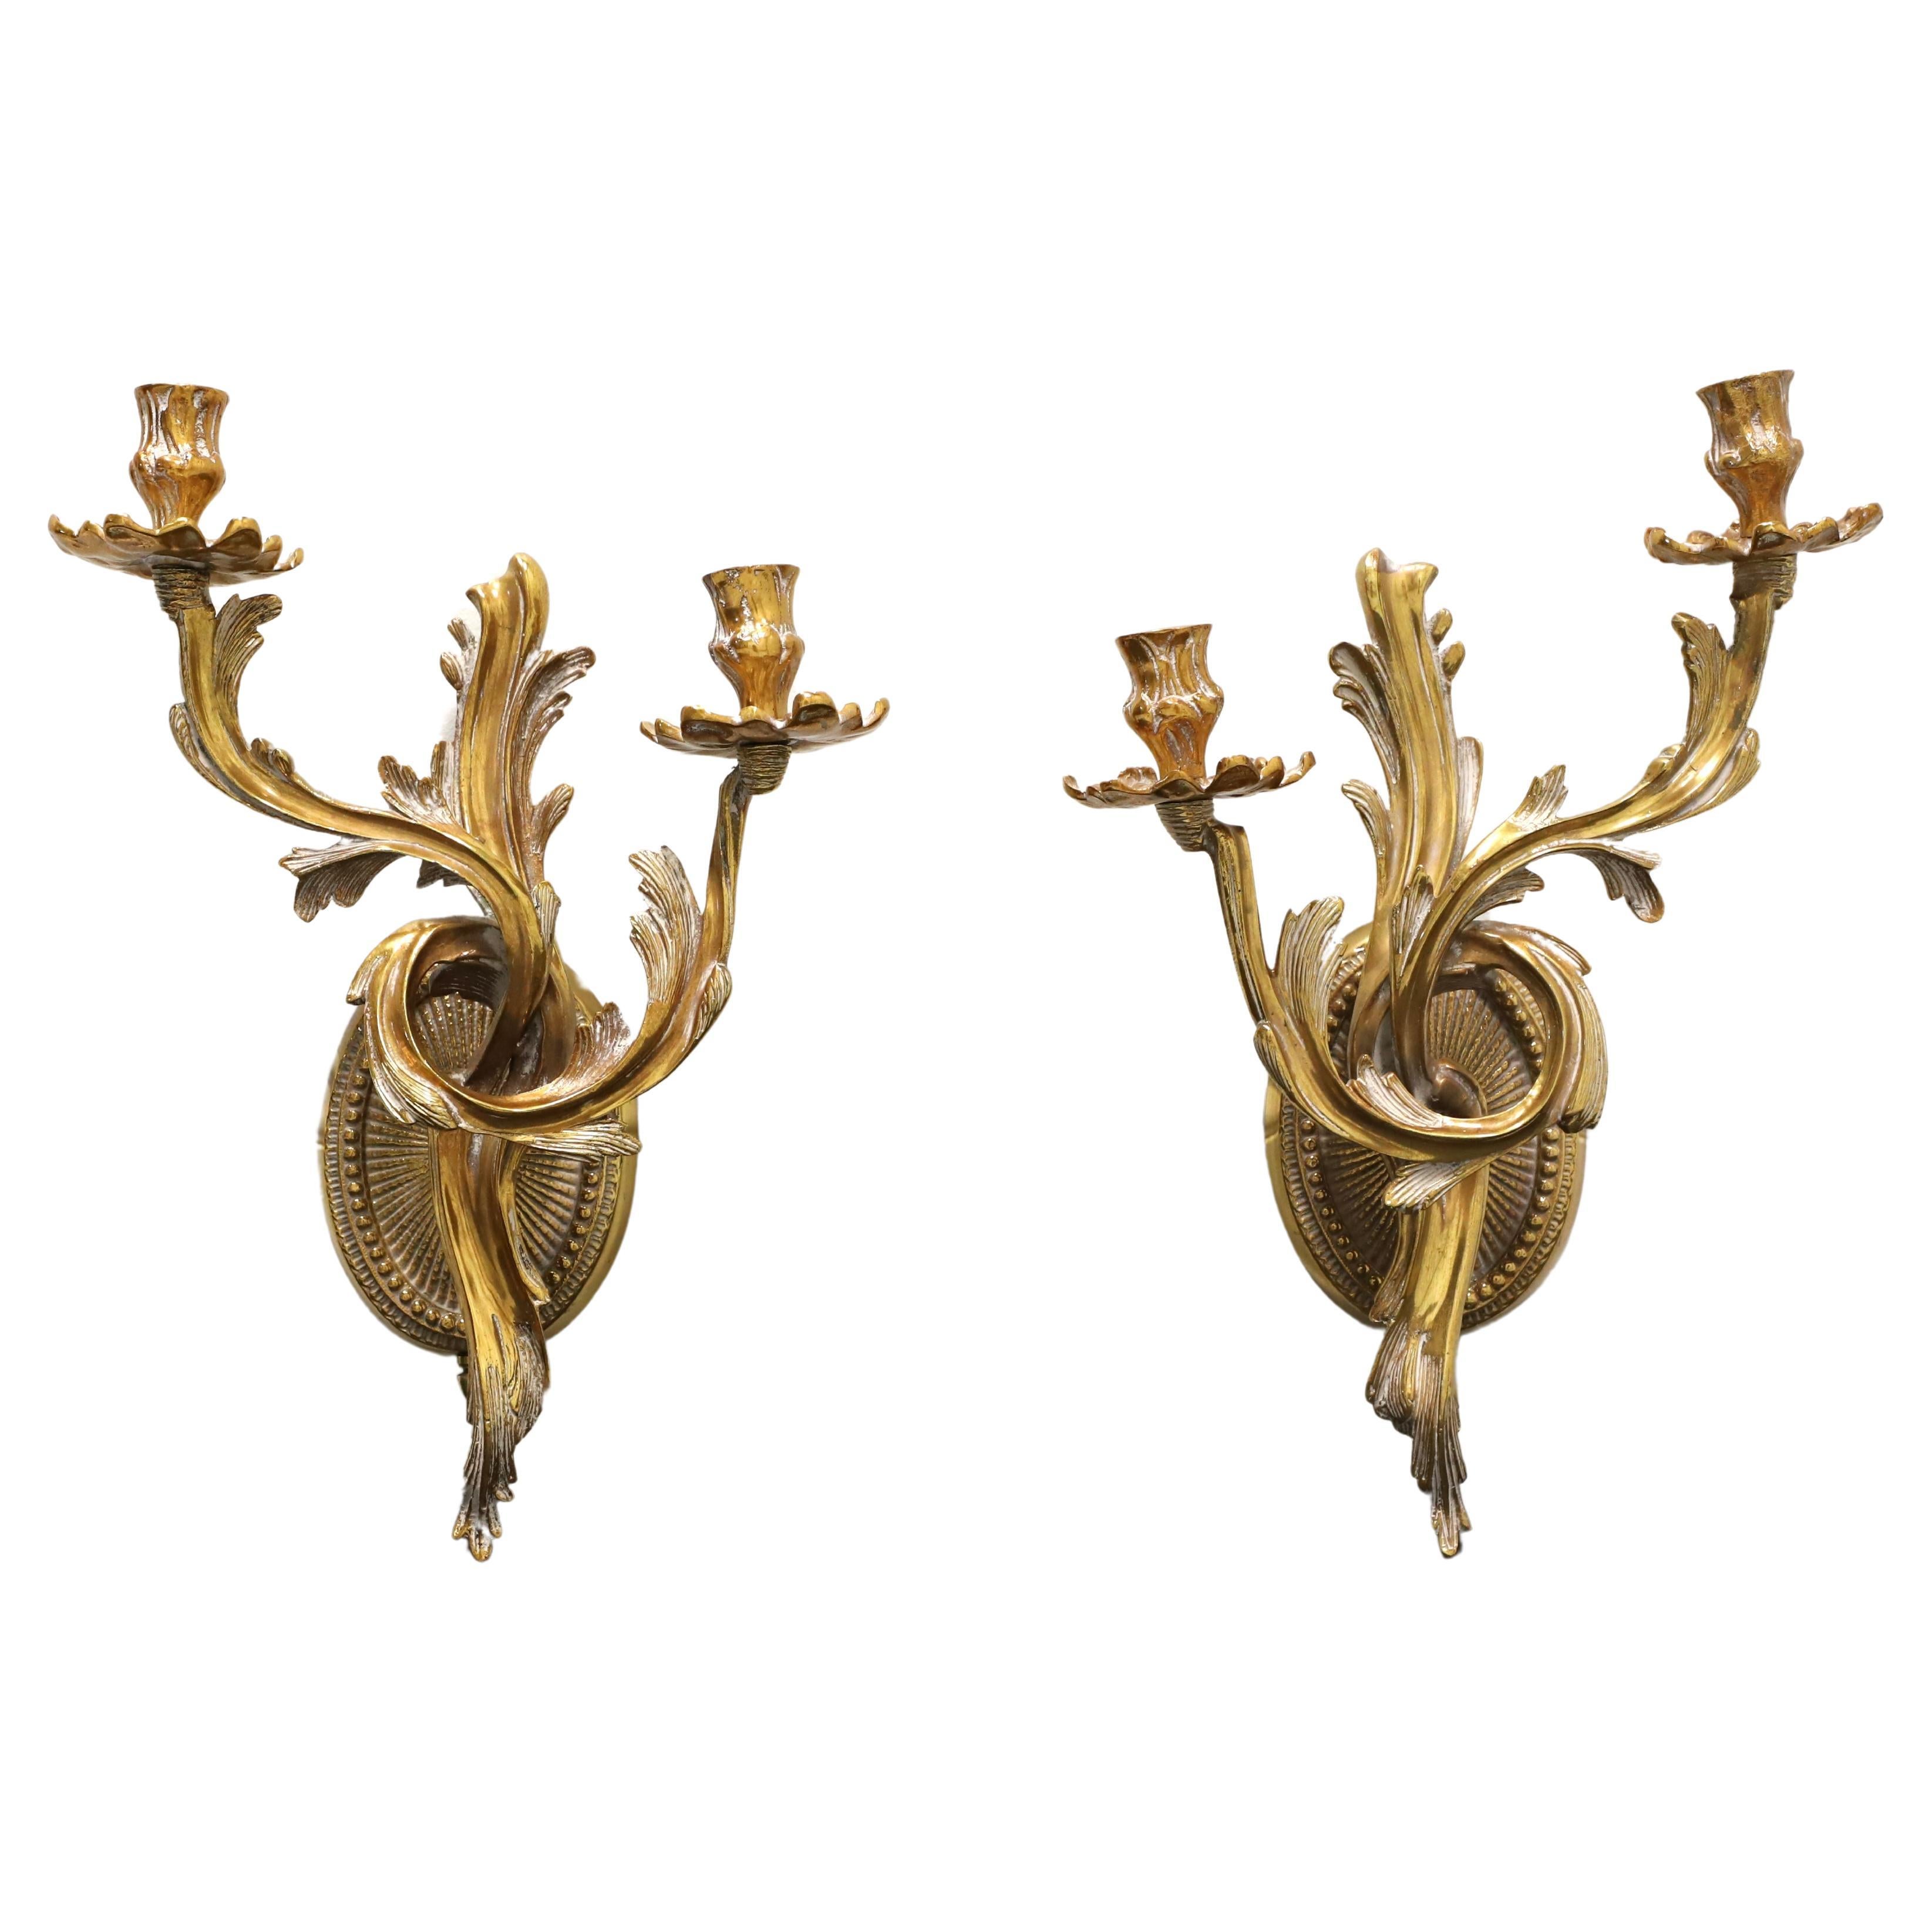 FREDERICK COOPER Solid Brass Rococo Style Candle Wall Sconces - Pair For Sale